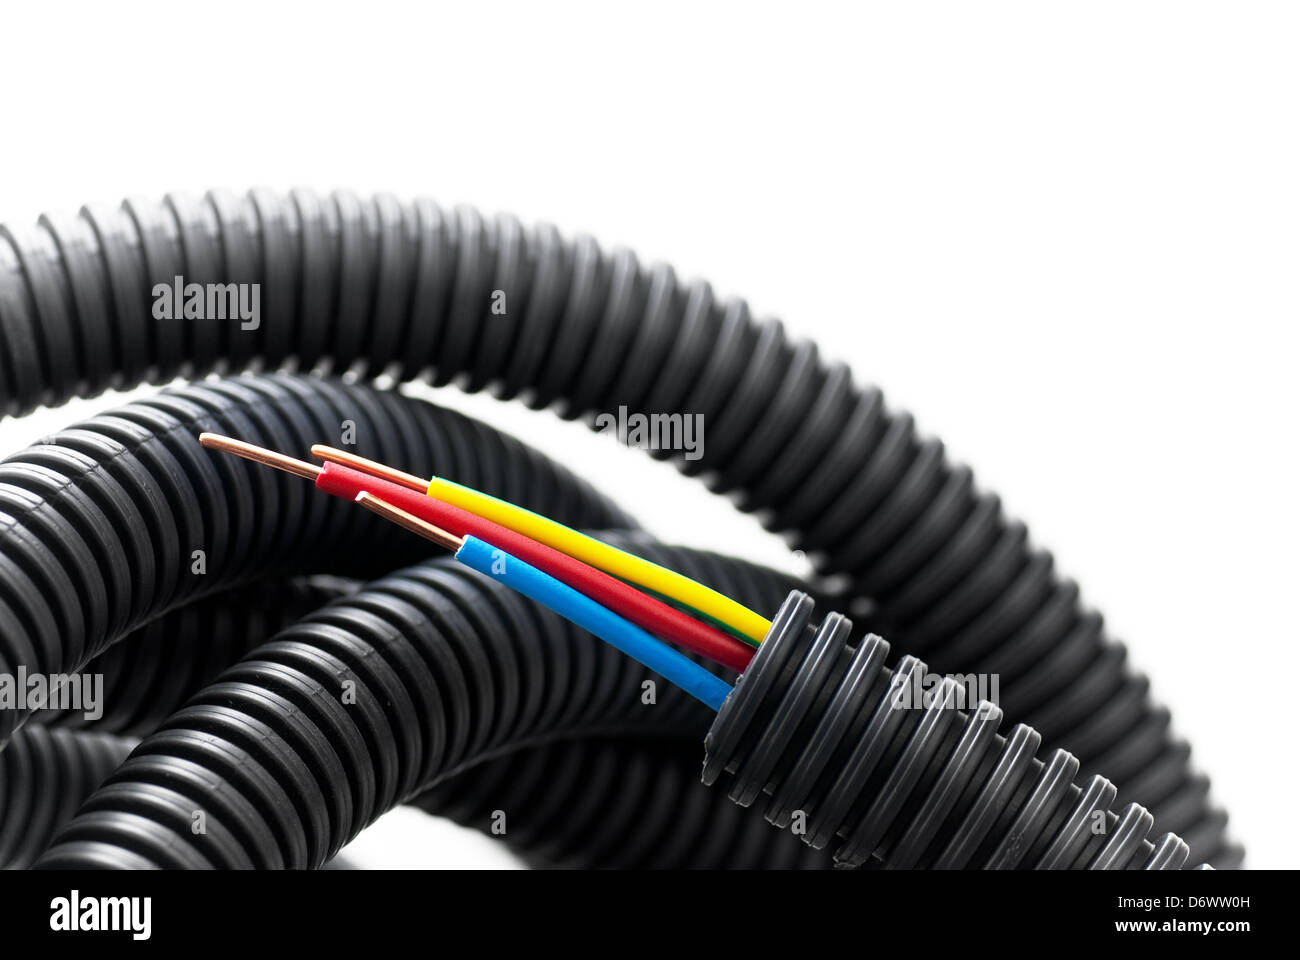 stripped copper cable inside a black flexible corrugated tube Stock Photo